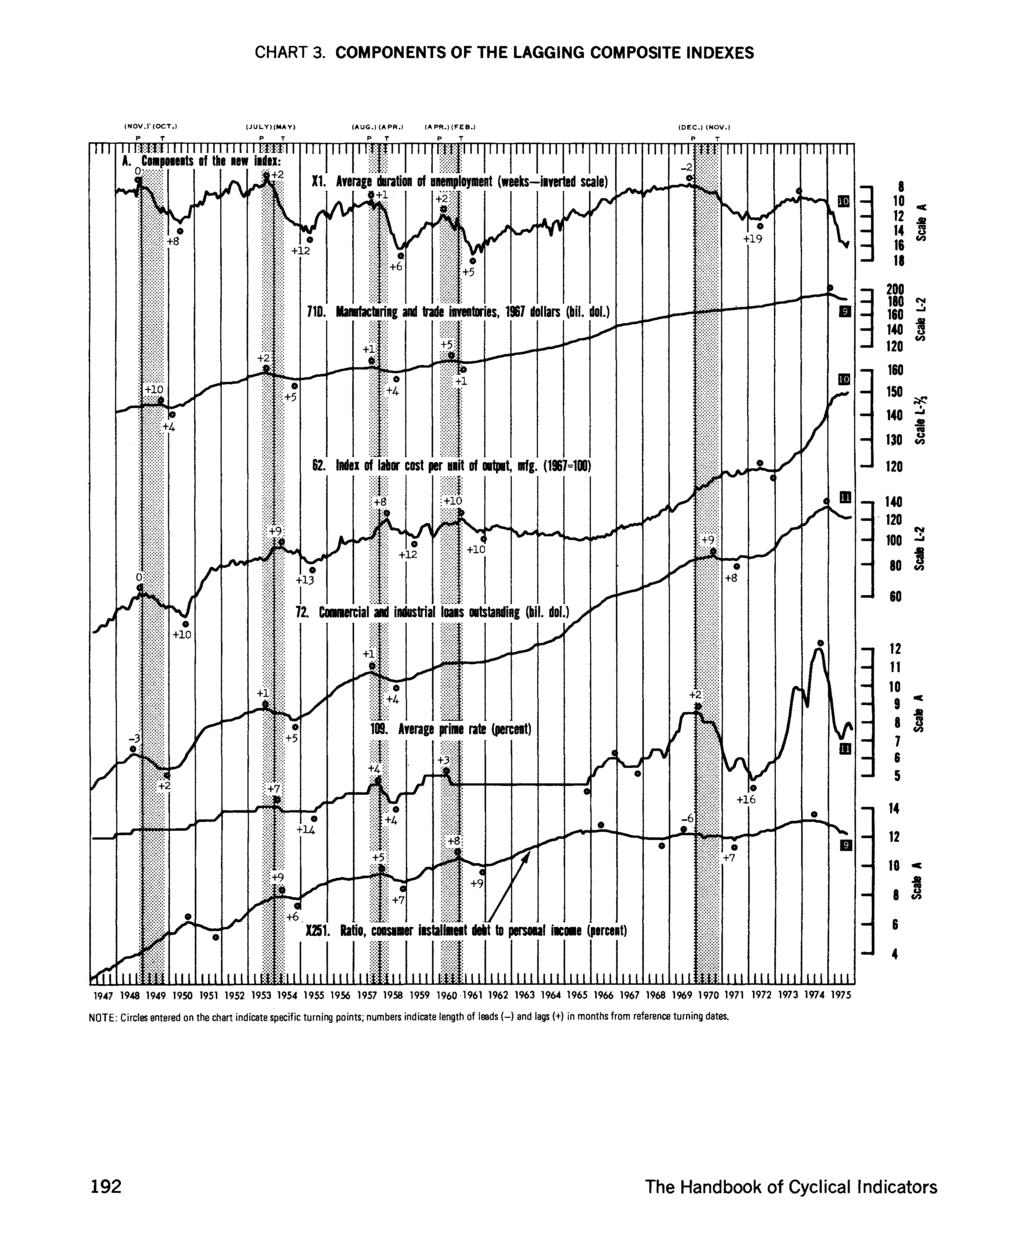 192 The Handbook of Cyclical Indicators Digitized for FRASER CHART 3. COMPONENTS OF THE LAGGING COMPOSITE INDEXES (NOV.J" (OCT.) (JULY)(MAY> (AUG.) (APR.) (APR.)(FEB.) (DEC.) (NOV.